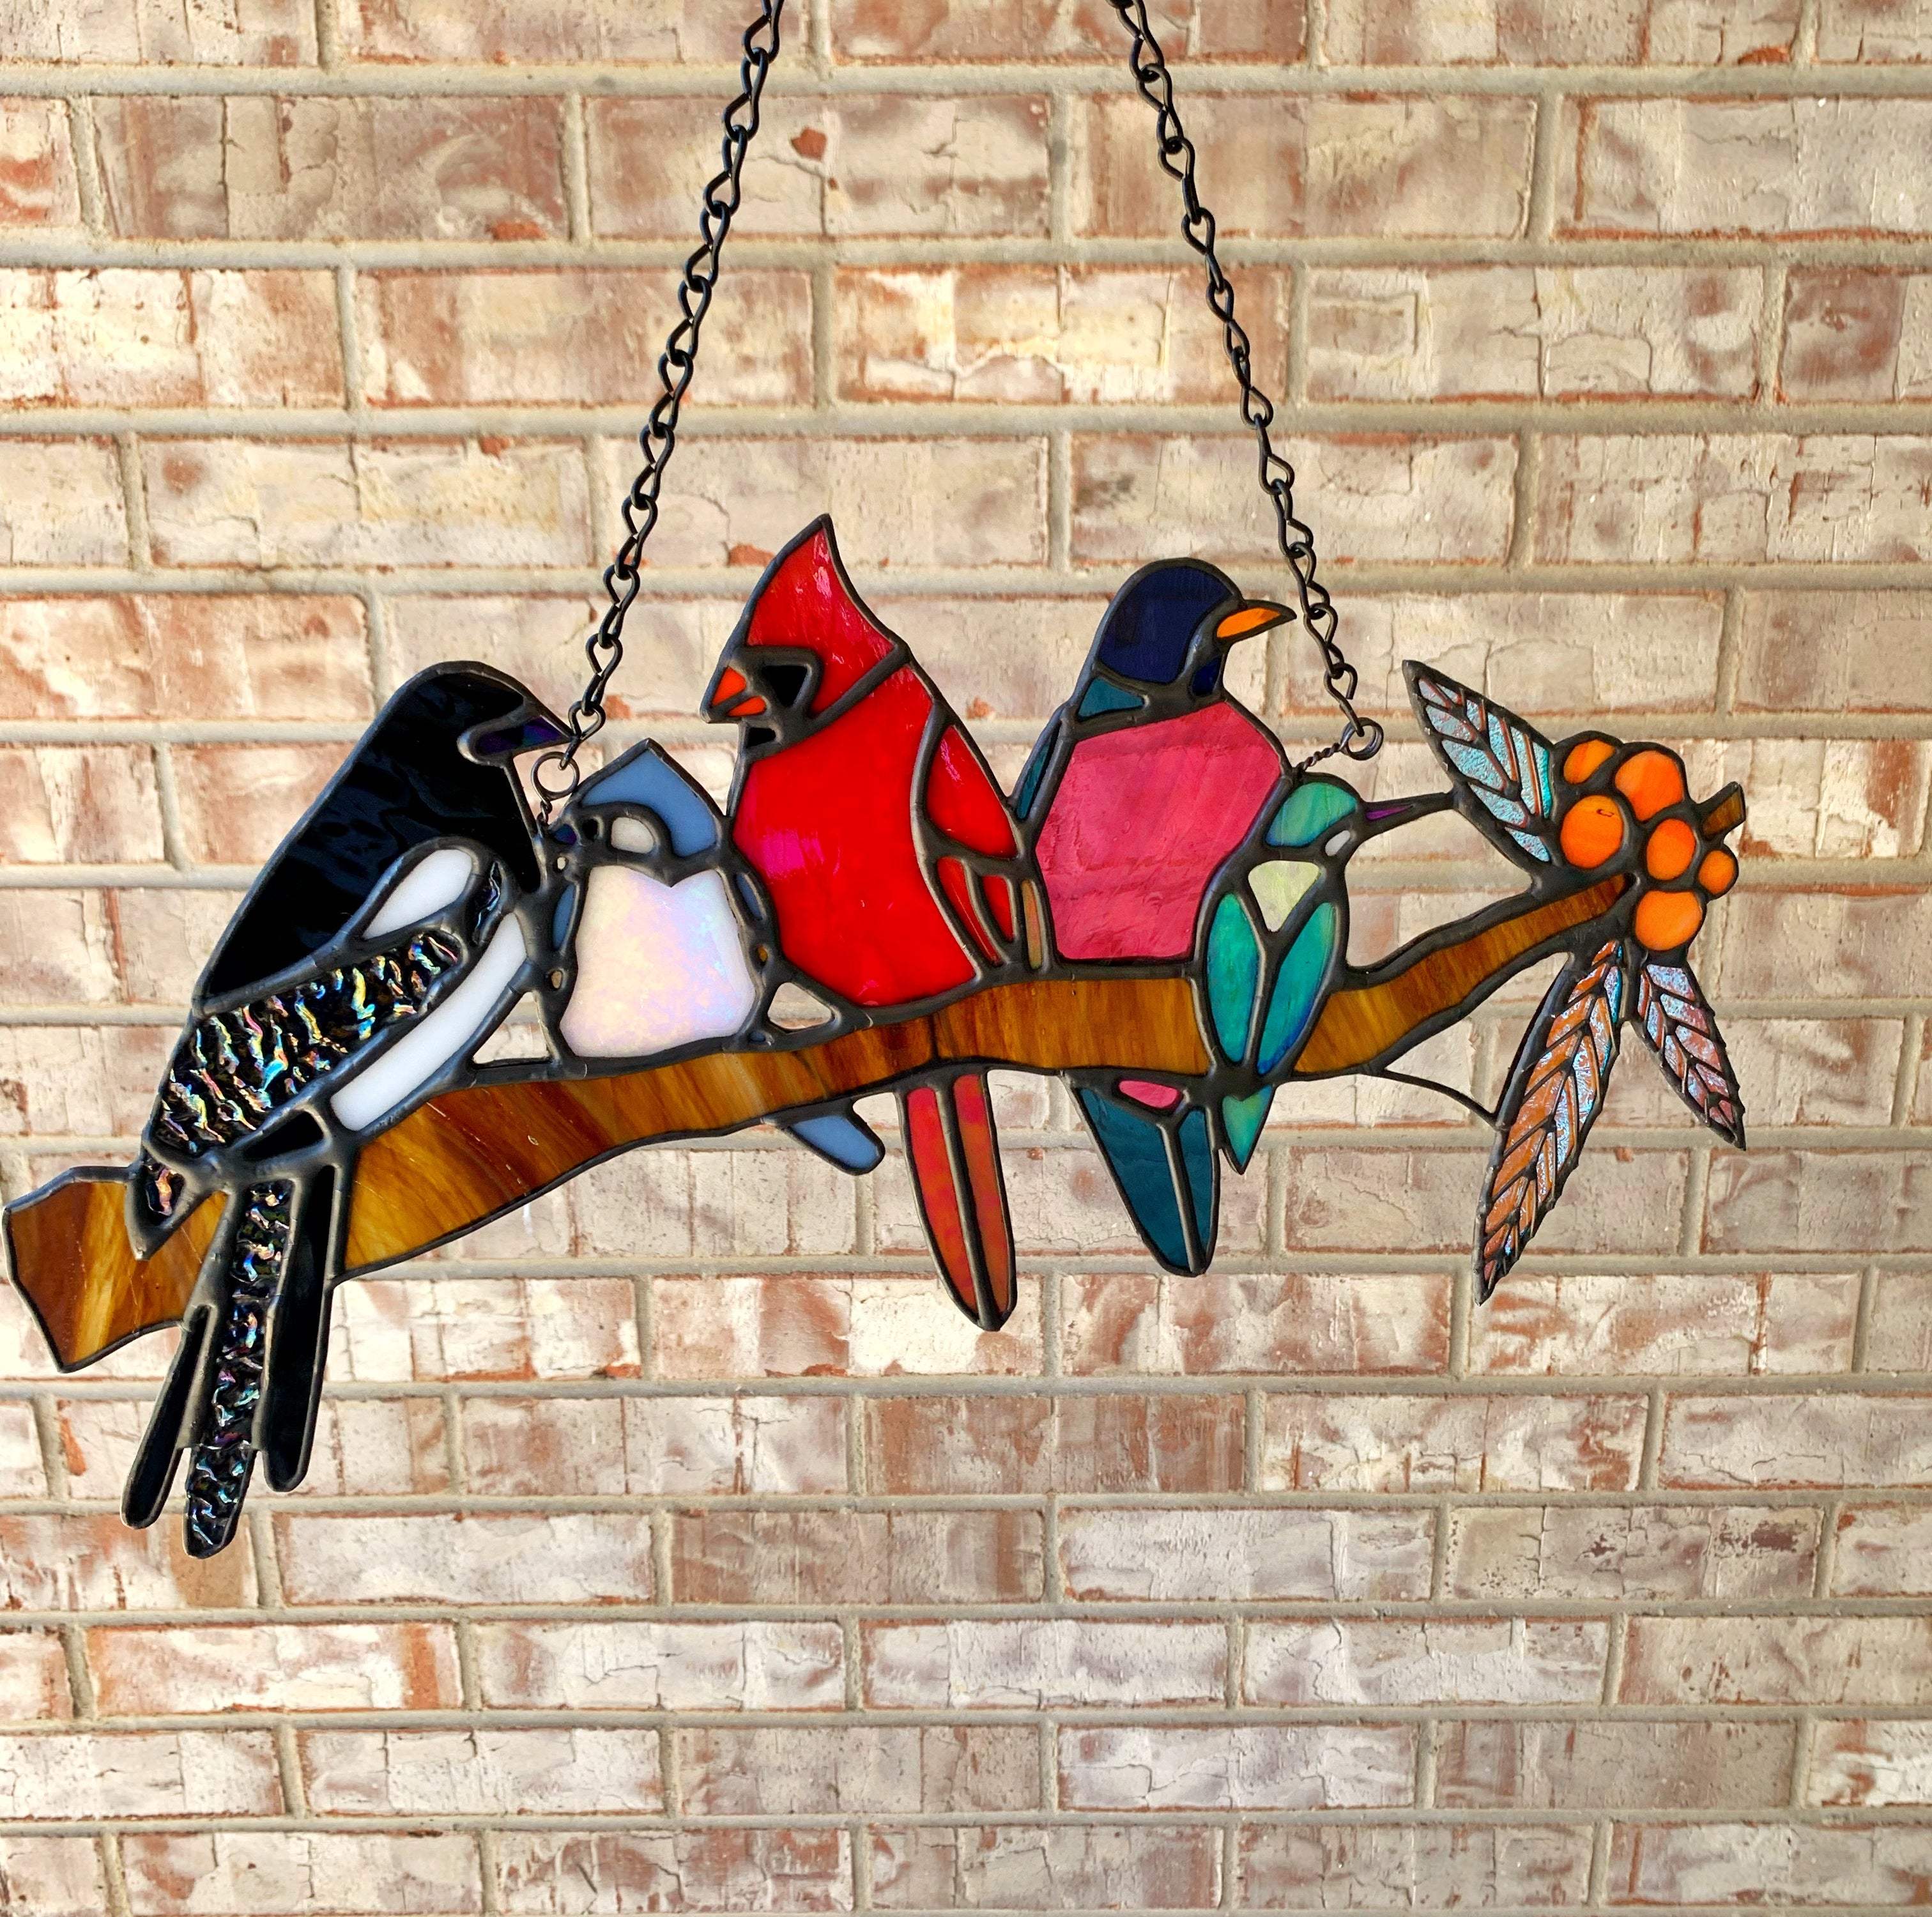 Stained glass art of several birds on a log